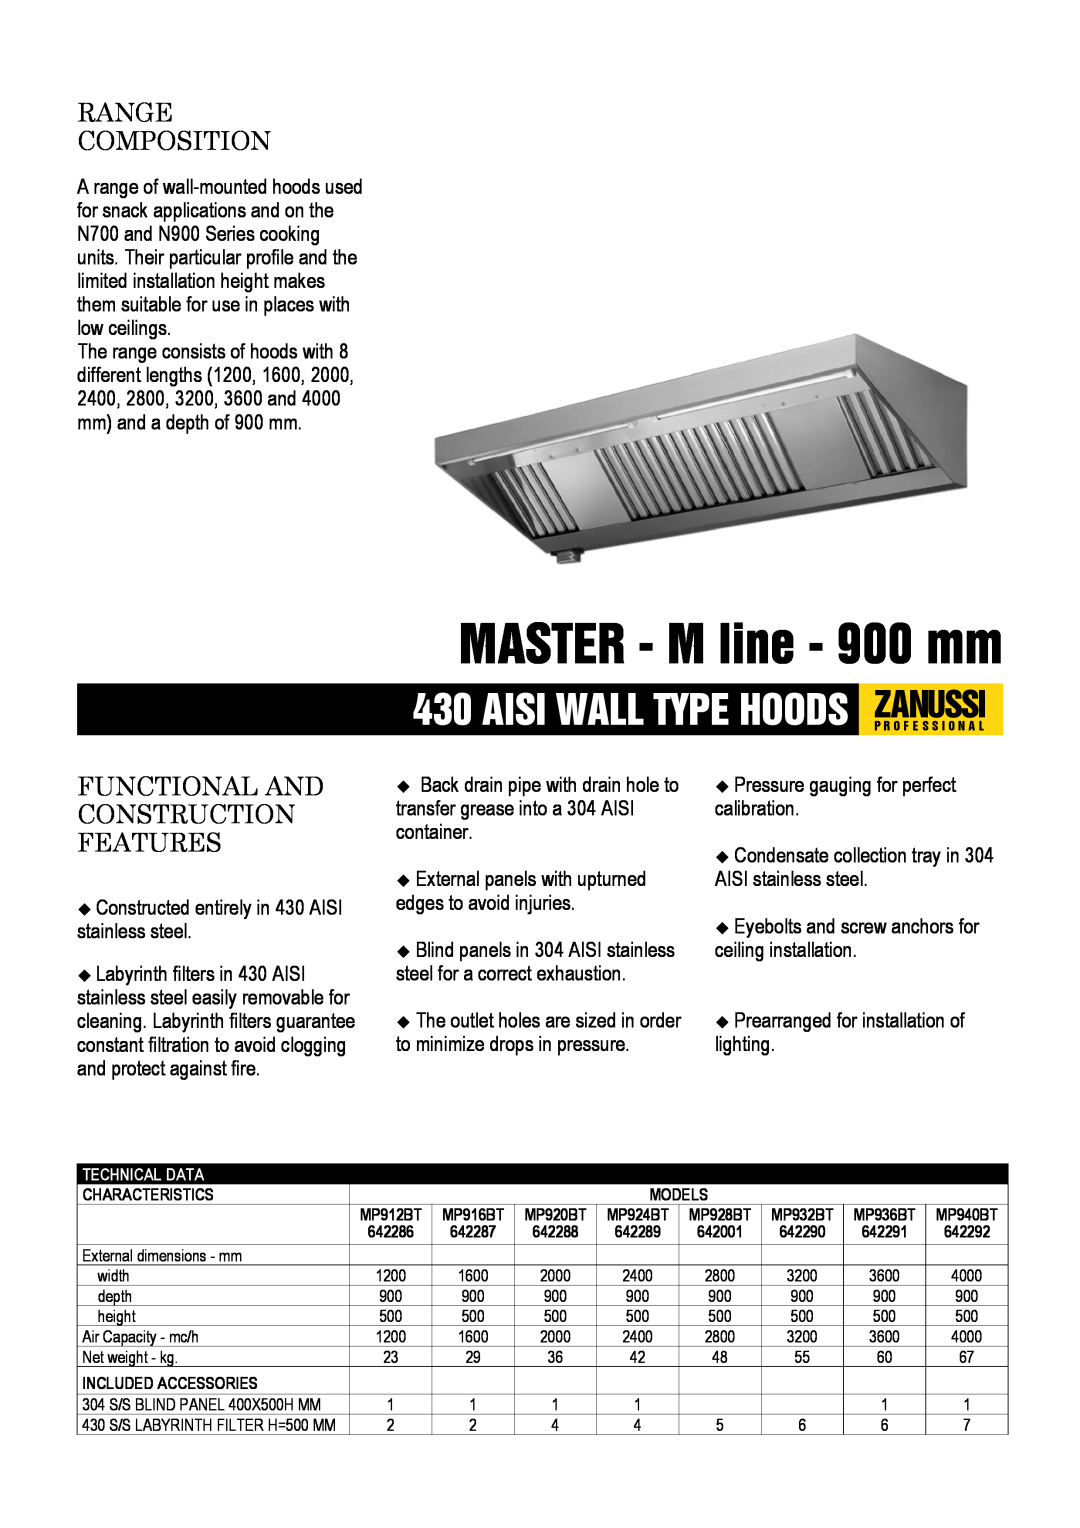 Zanussi 642289, 642291, 642290 dimensions MASTER - M line - 900 mm, Range Composition, Functional And Construction Features 